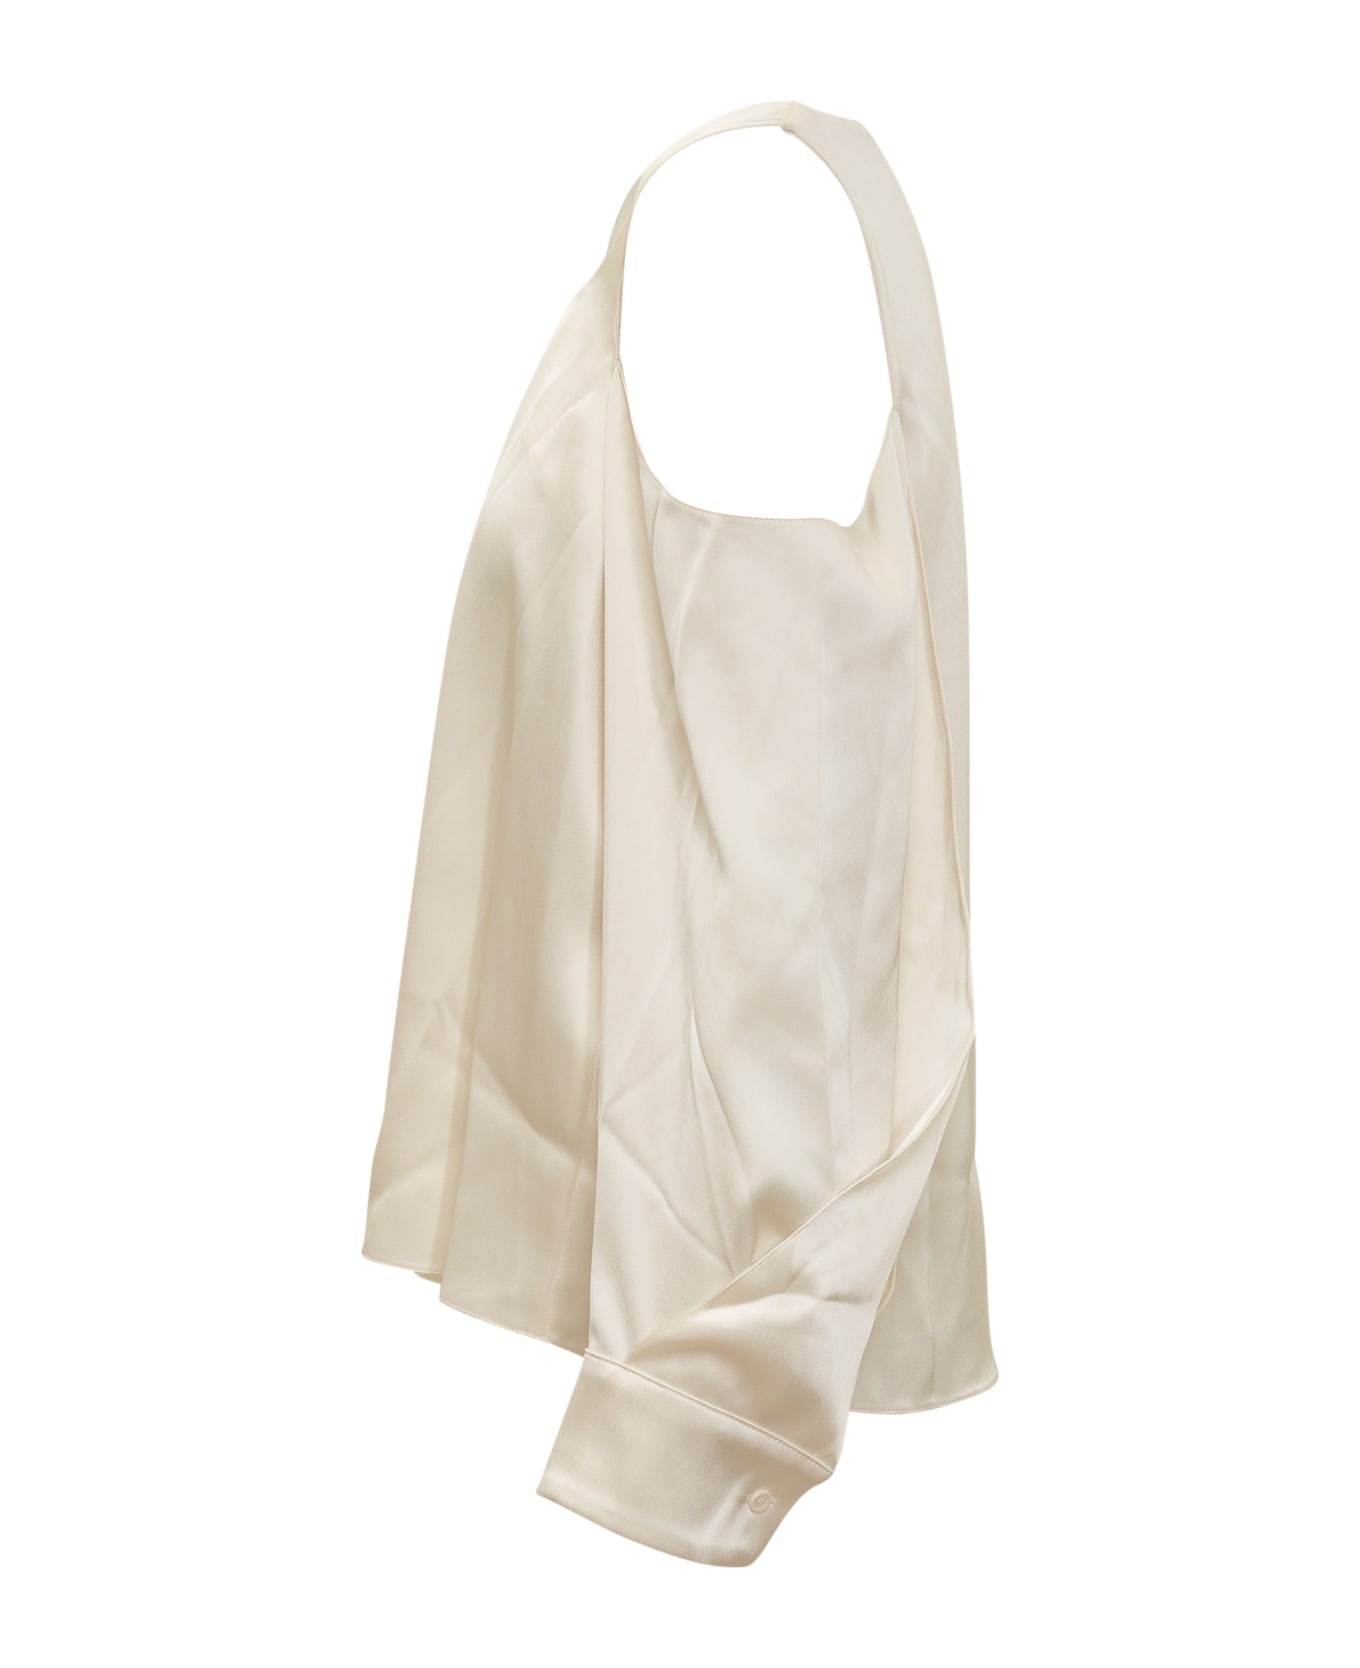 J.W. Anderson Twisted Shoulder Top - White